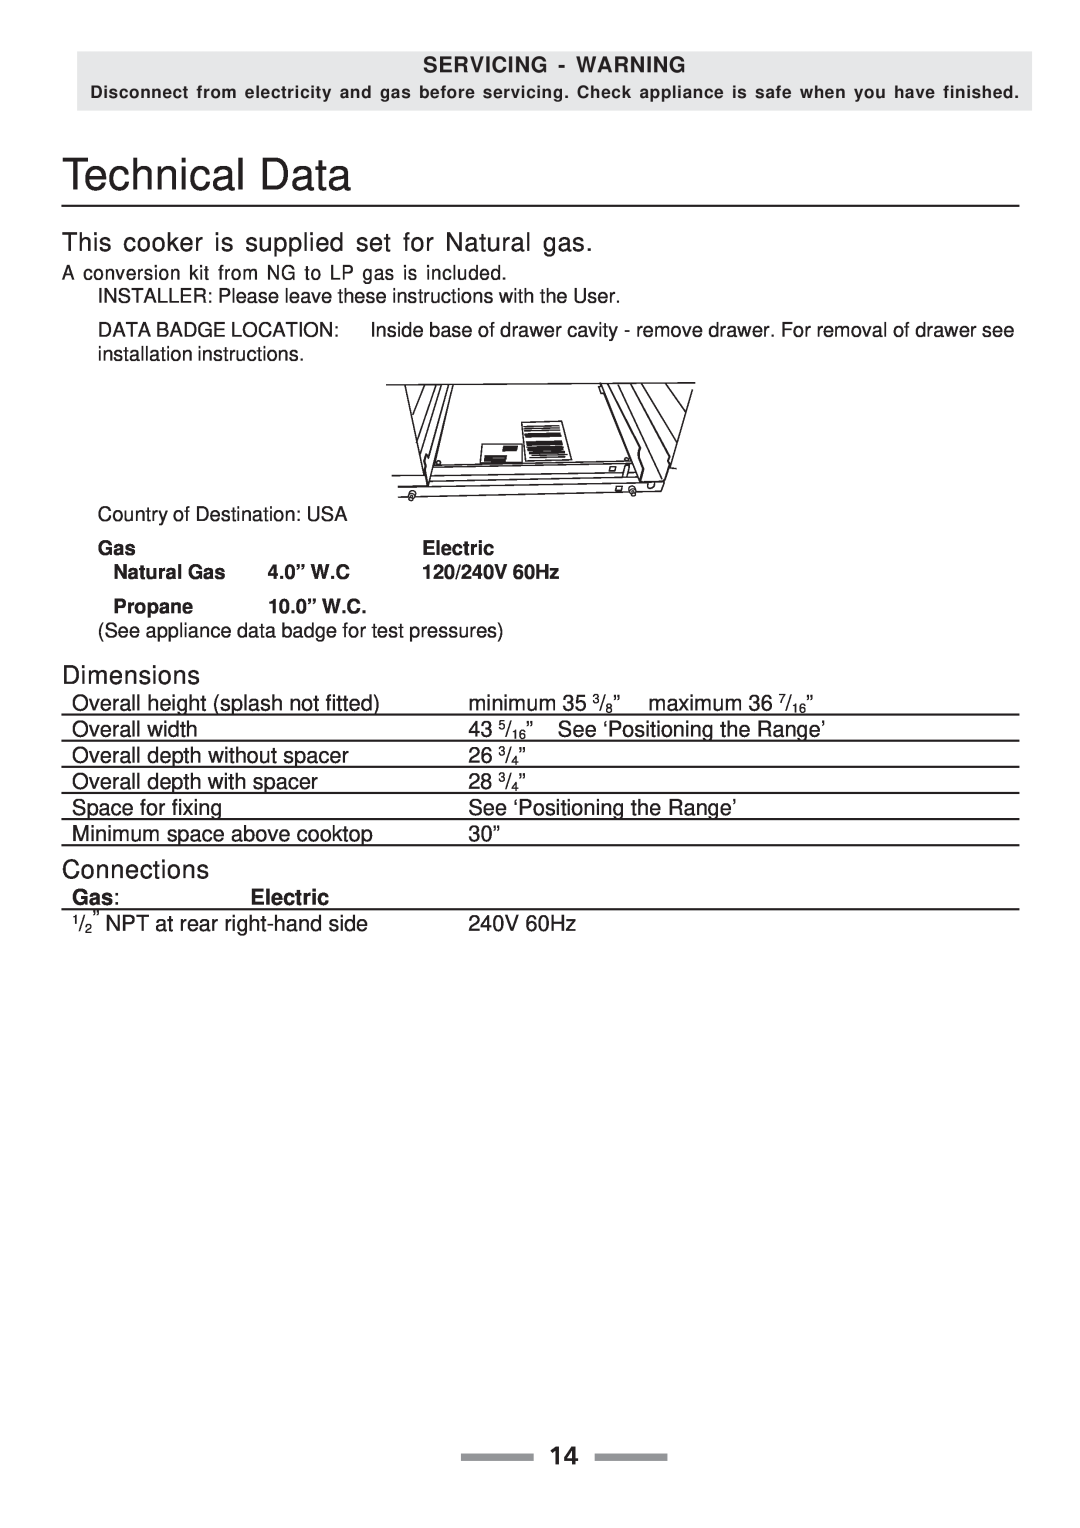 Aga Ranges F104010-01 manual Technical Data, This cooker is supplied set for Natural gas, Dimensions, Connections 